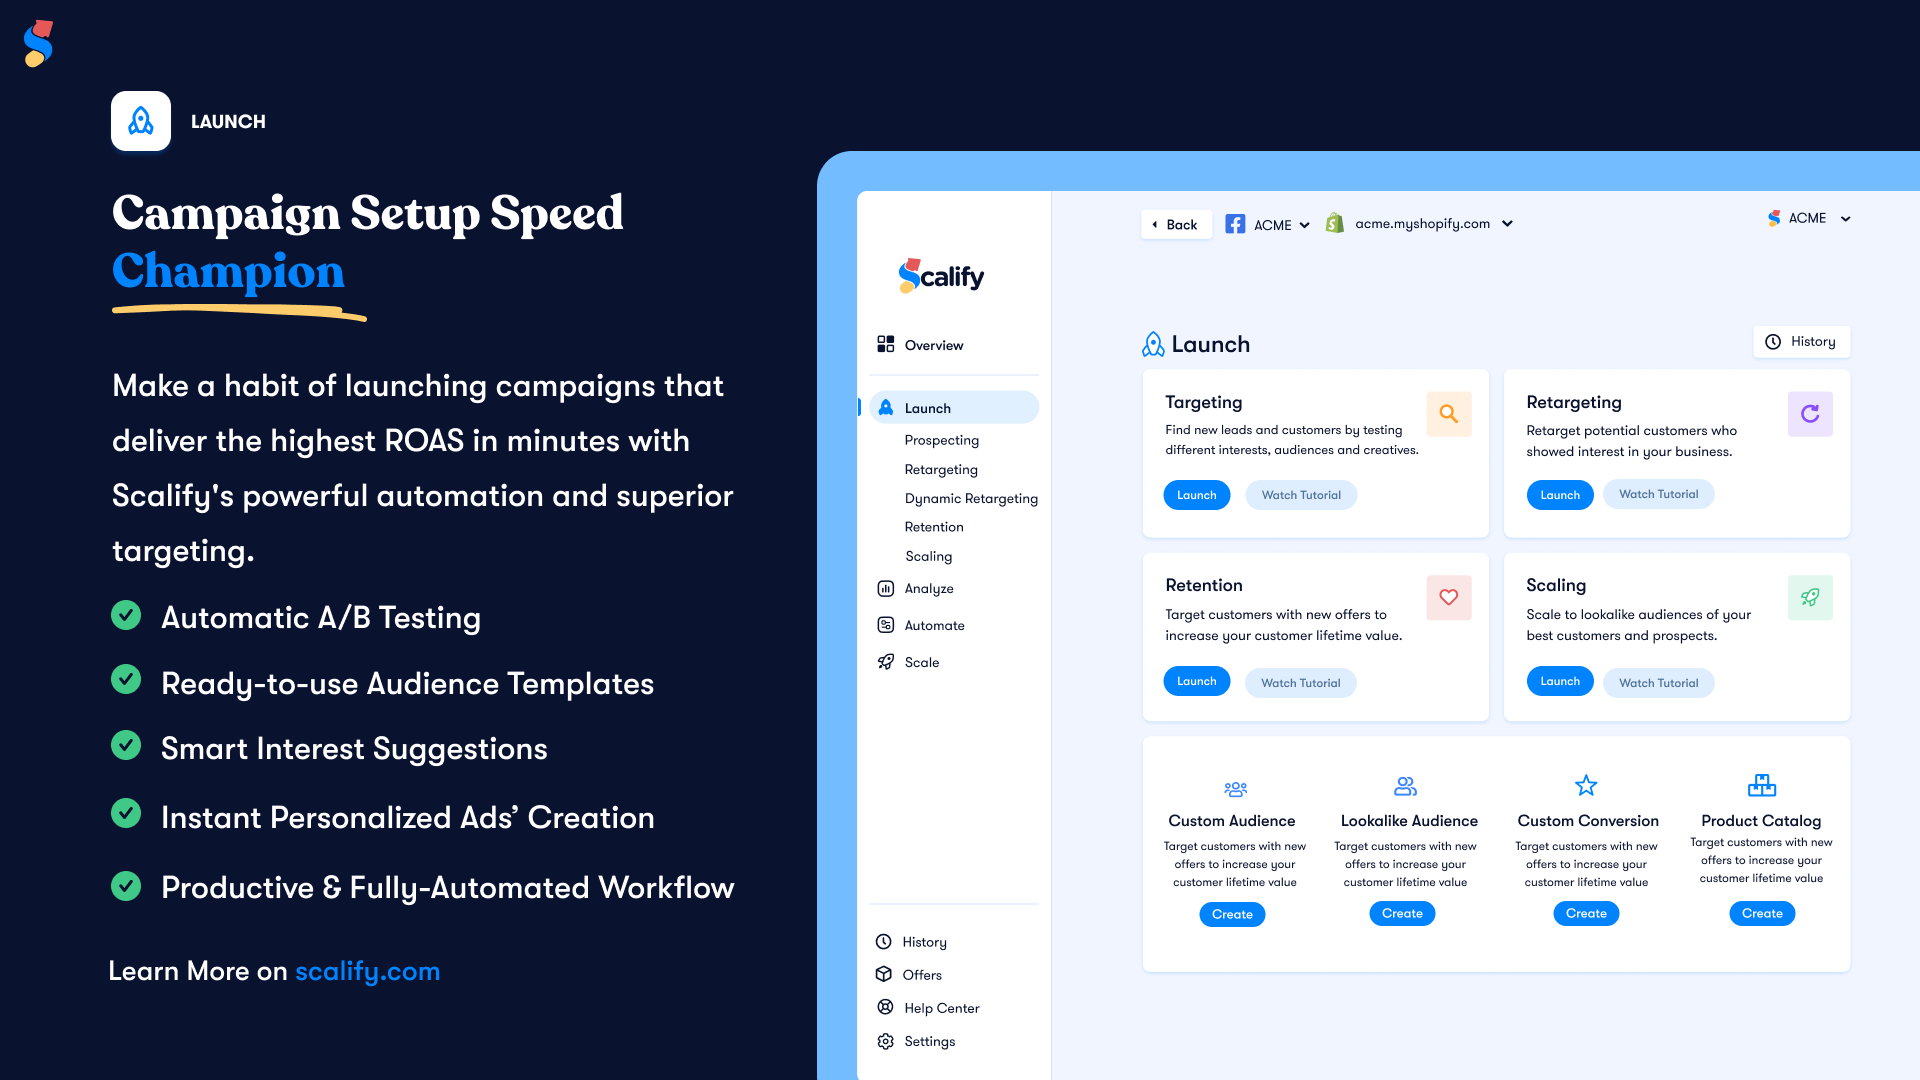 Launch new Facebook & Instagram ads easily with Scalify. Create personalized ads faster, target highly-converting audiences, and A/B test variations automatically to scale the next best ad.